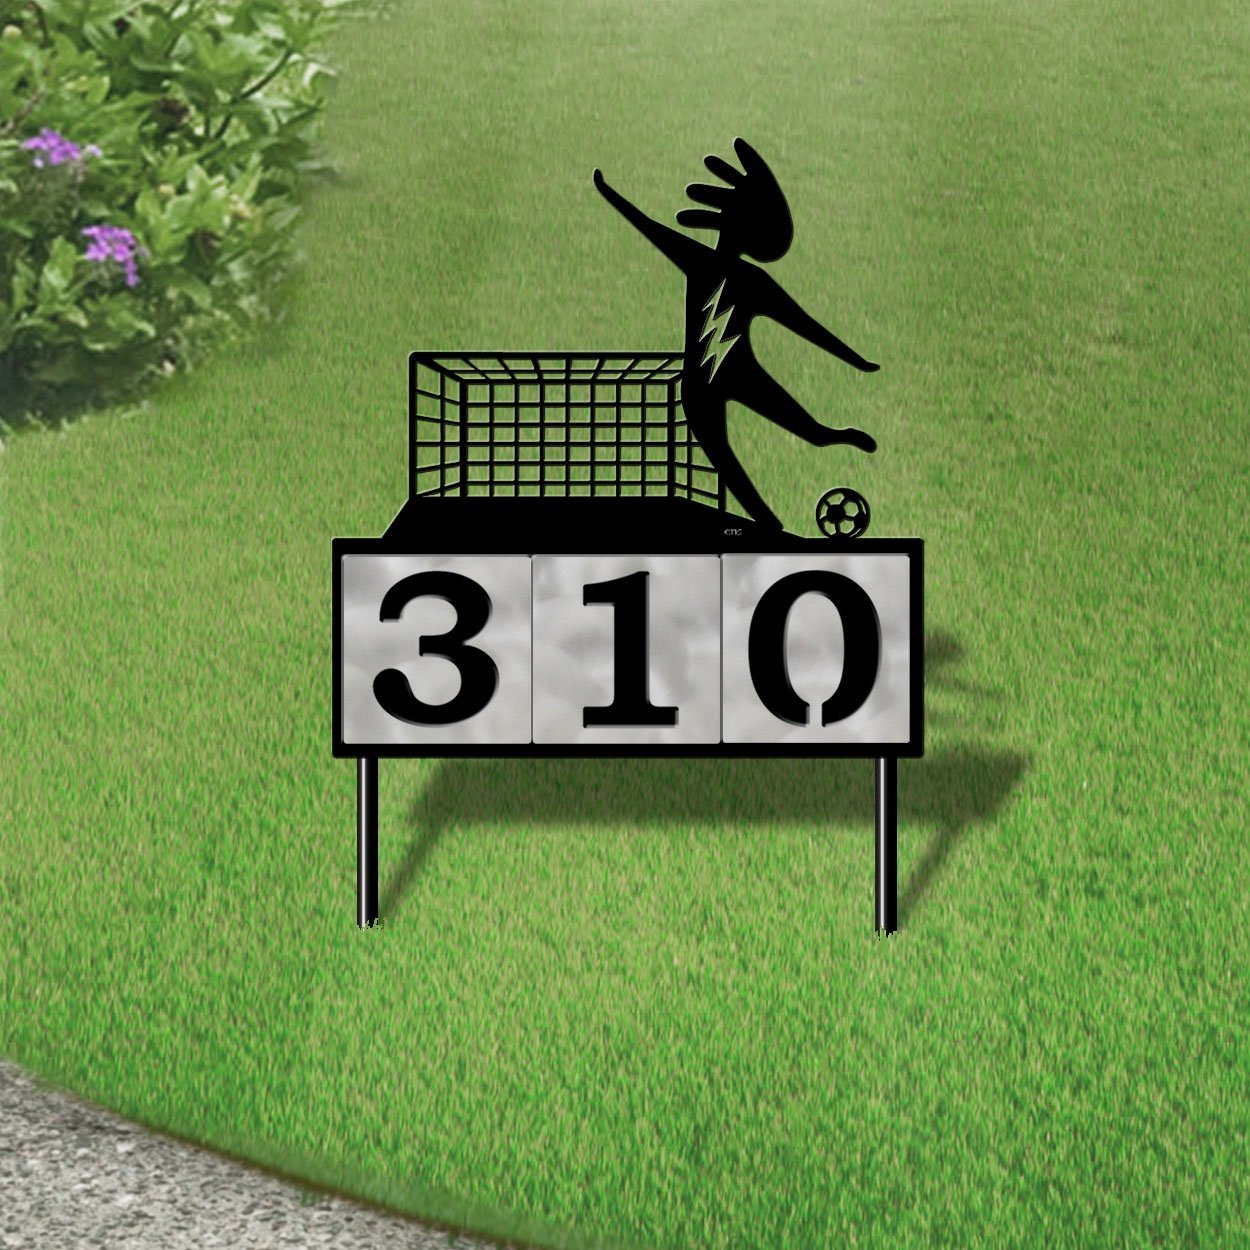 610183 - Kokopelli Lone Soccer Player Design 3-Digit Horizontal 6-inch Tile Outdoor House Numbers Yard Sign